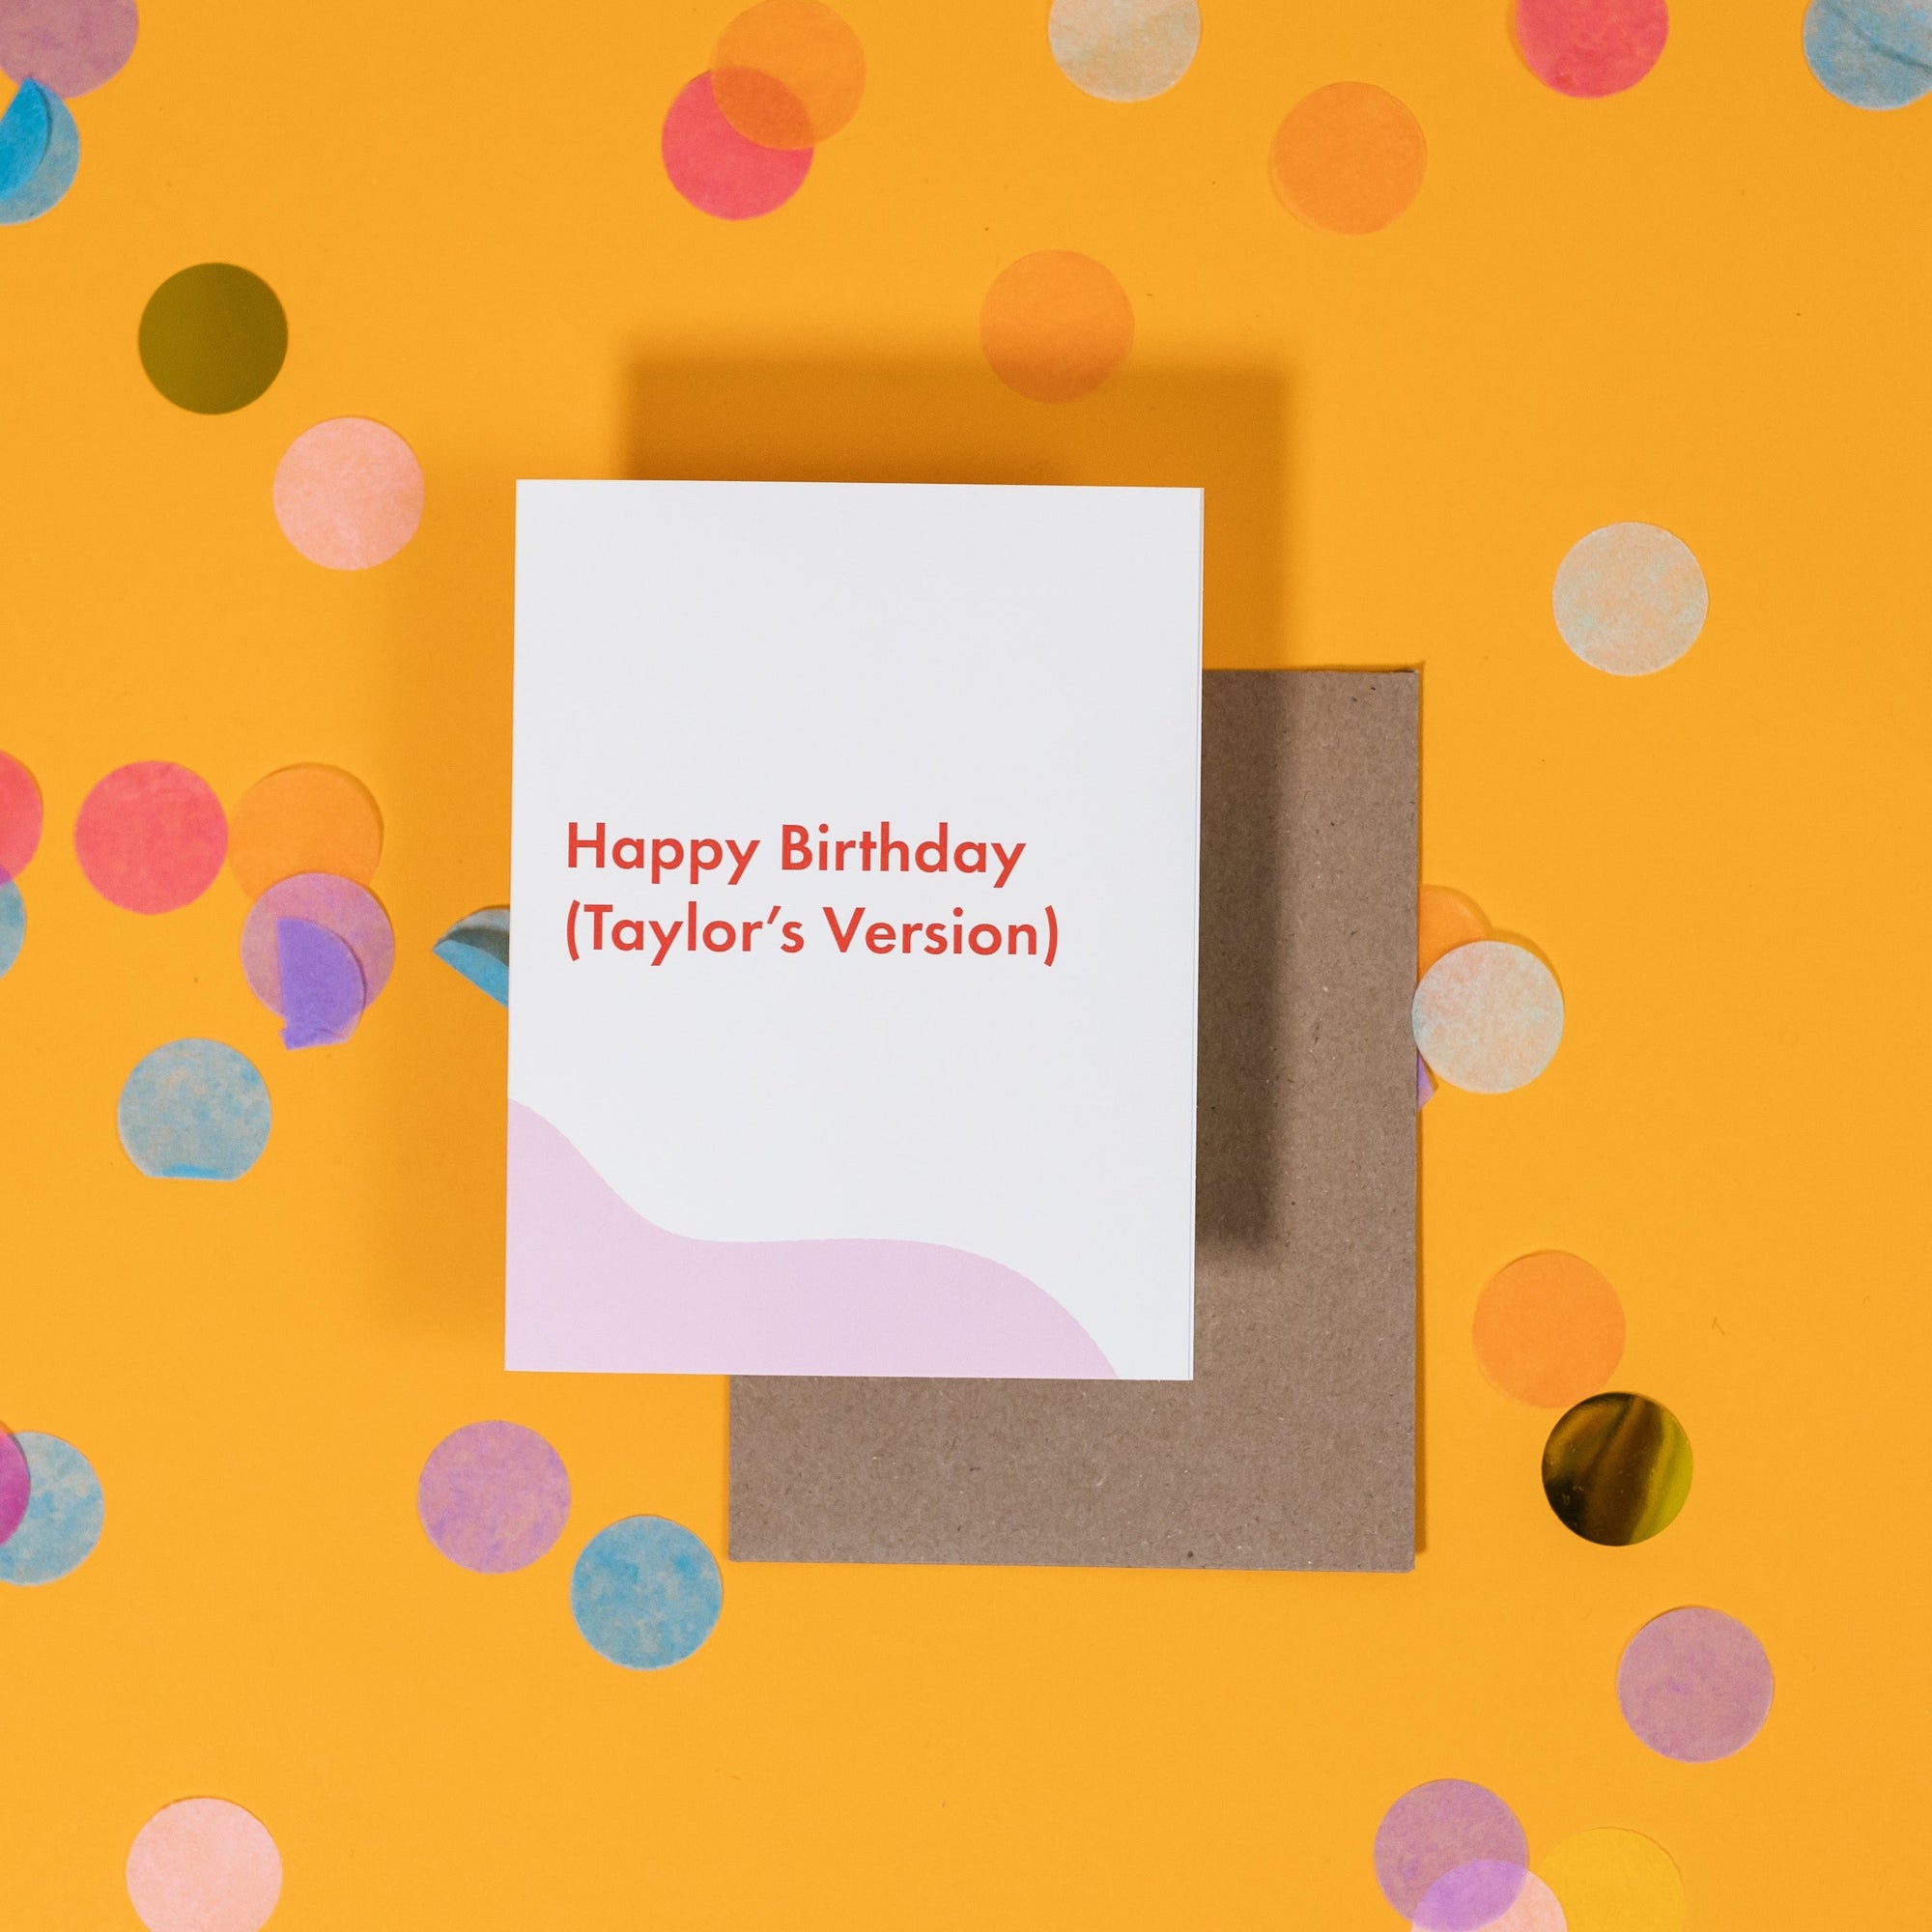 On a sunny mustard background is a greeting card and envelope with big, colorful confetti scattered around. The white greeting card says "Happy Birthday (Taylor's Version)" in sans serif red font. The neon red envelope sits under the card. 